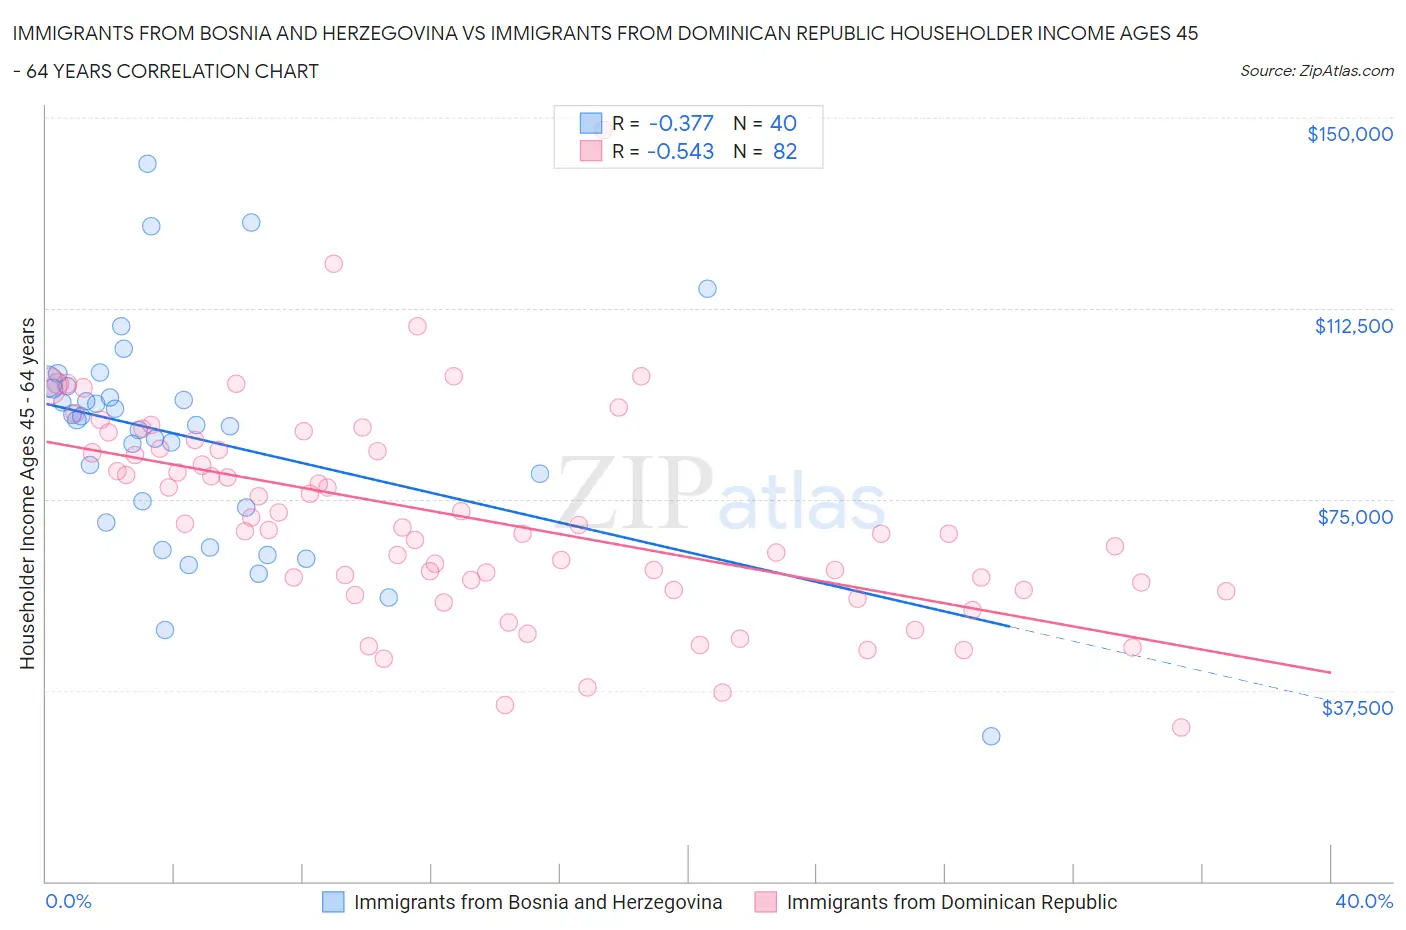 Immigrants from Bosnia and Herzegovina vs Immigrants from Dominican Republic Householder Income Ages 45 - 64 years